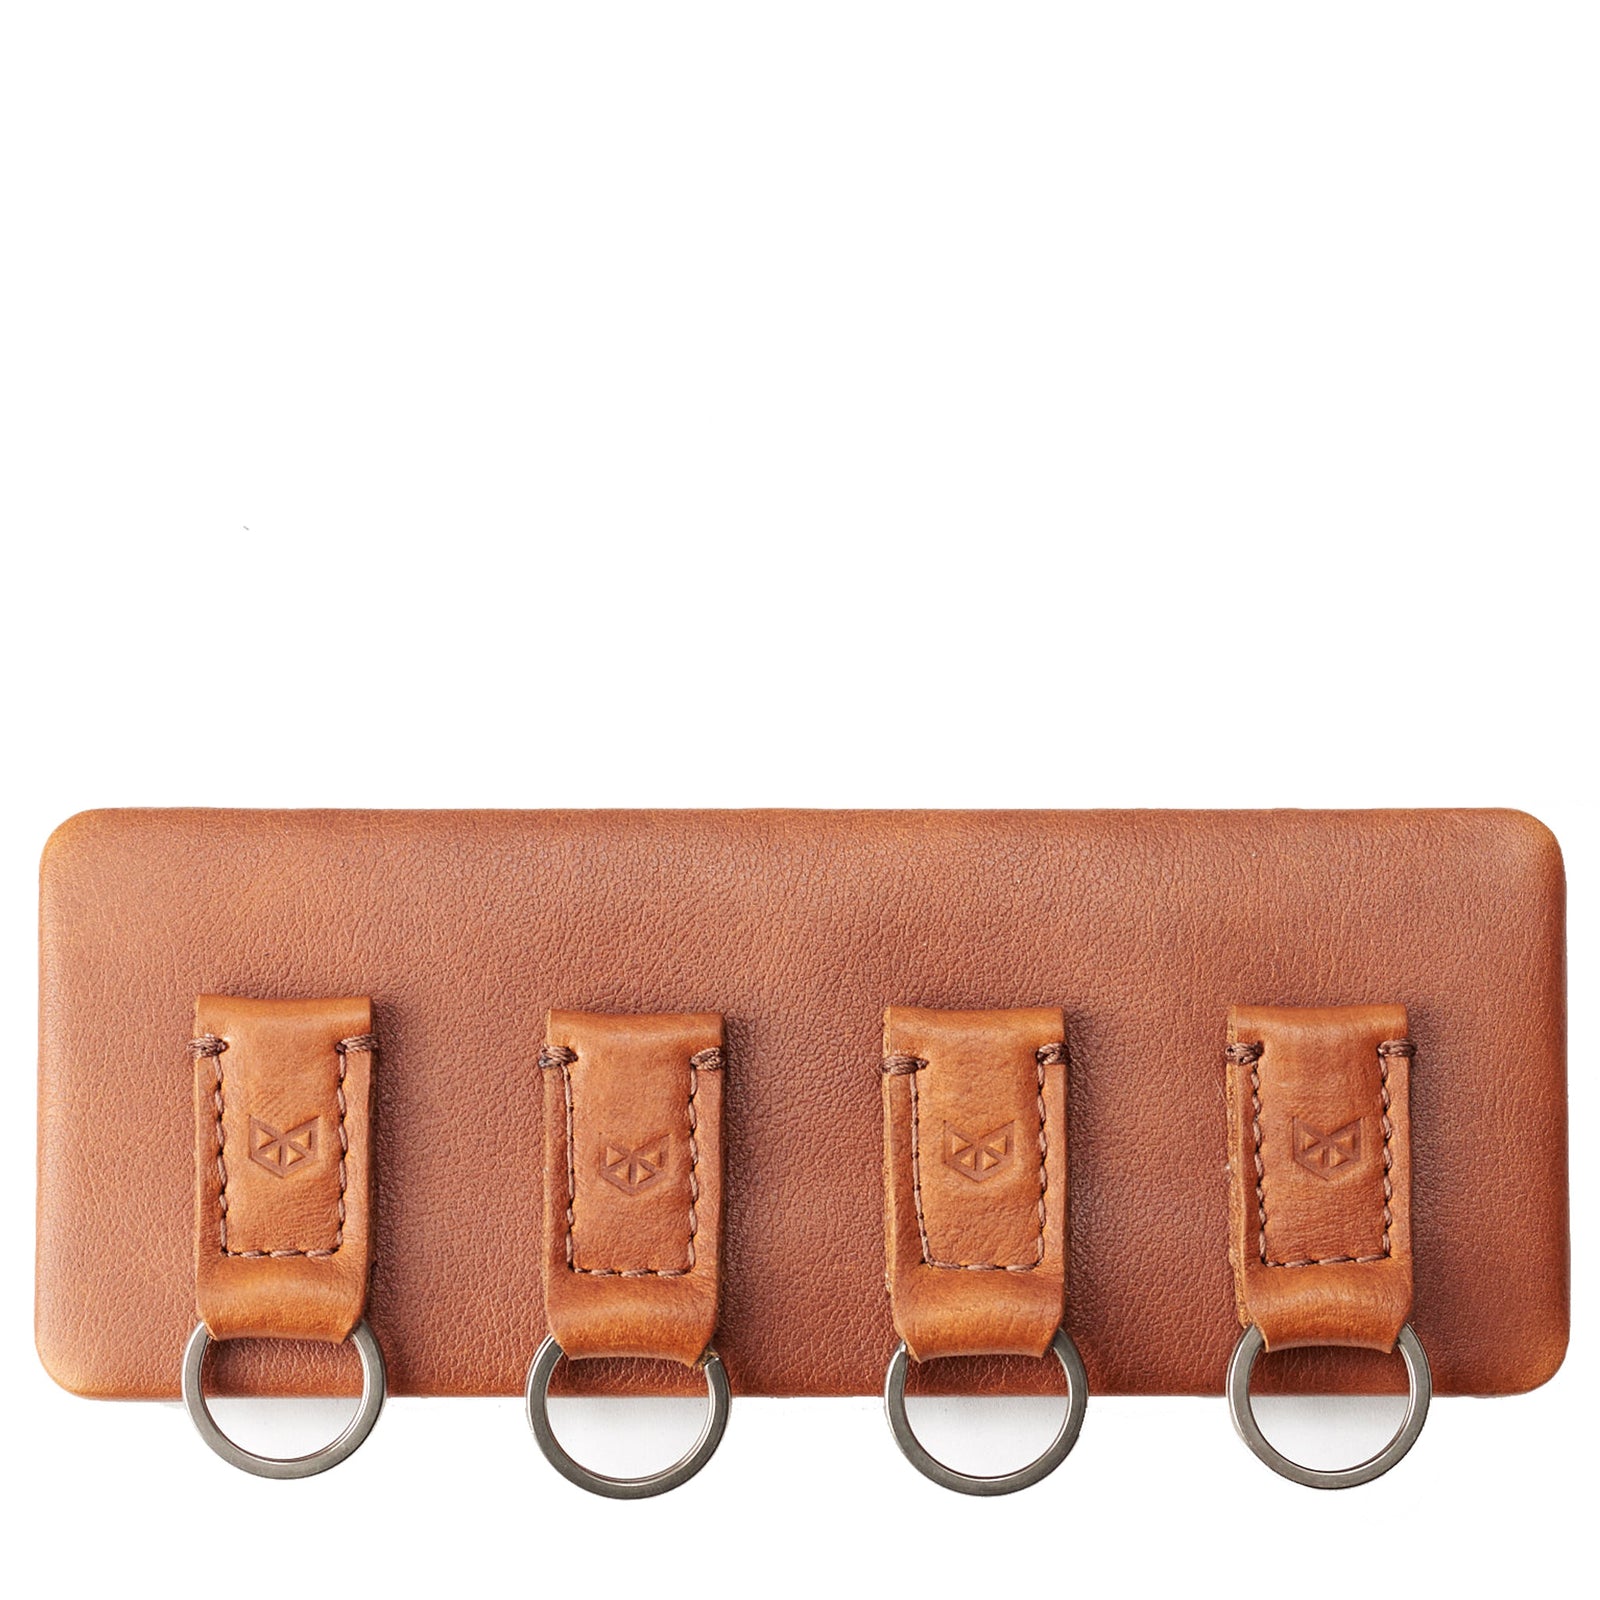 Back. Magnetic key hanger organizer. Tan leather magnetic key holder for wall decor. Entryway organizer decor. Home decoration. Keys organizer. Crafted by Capra Leather.